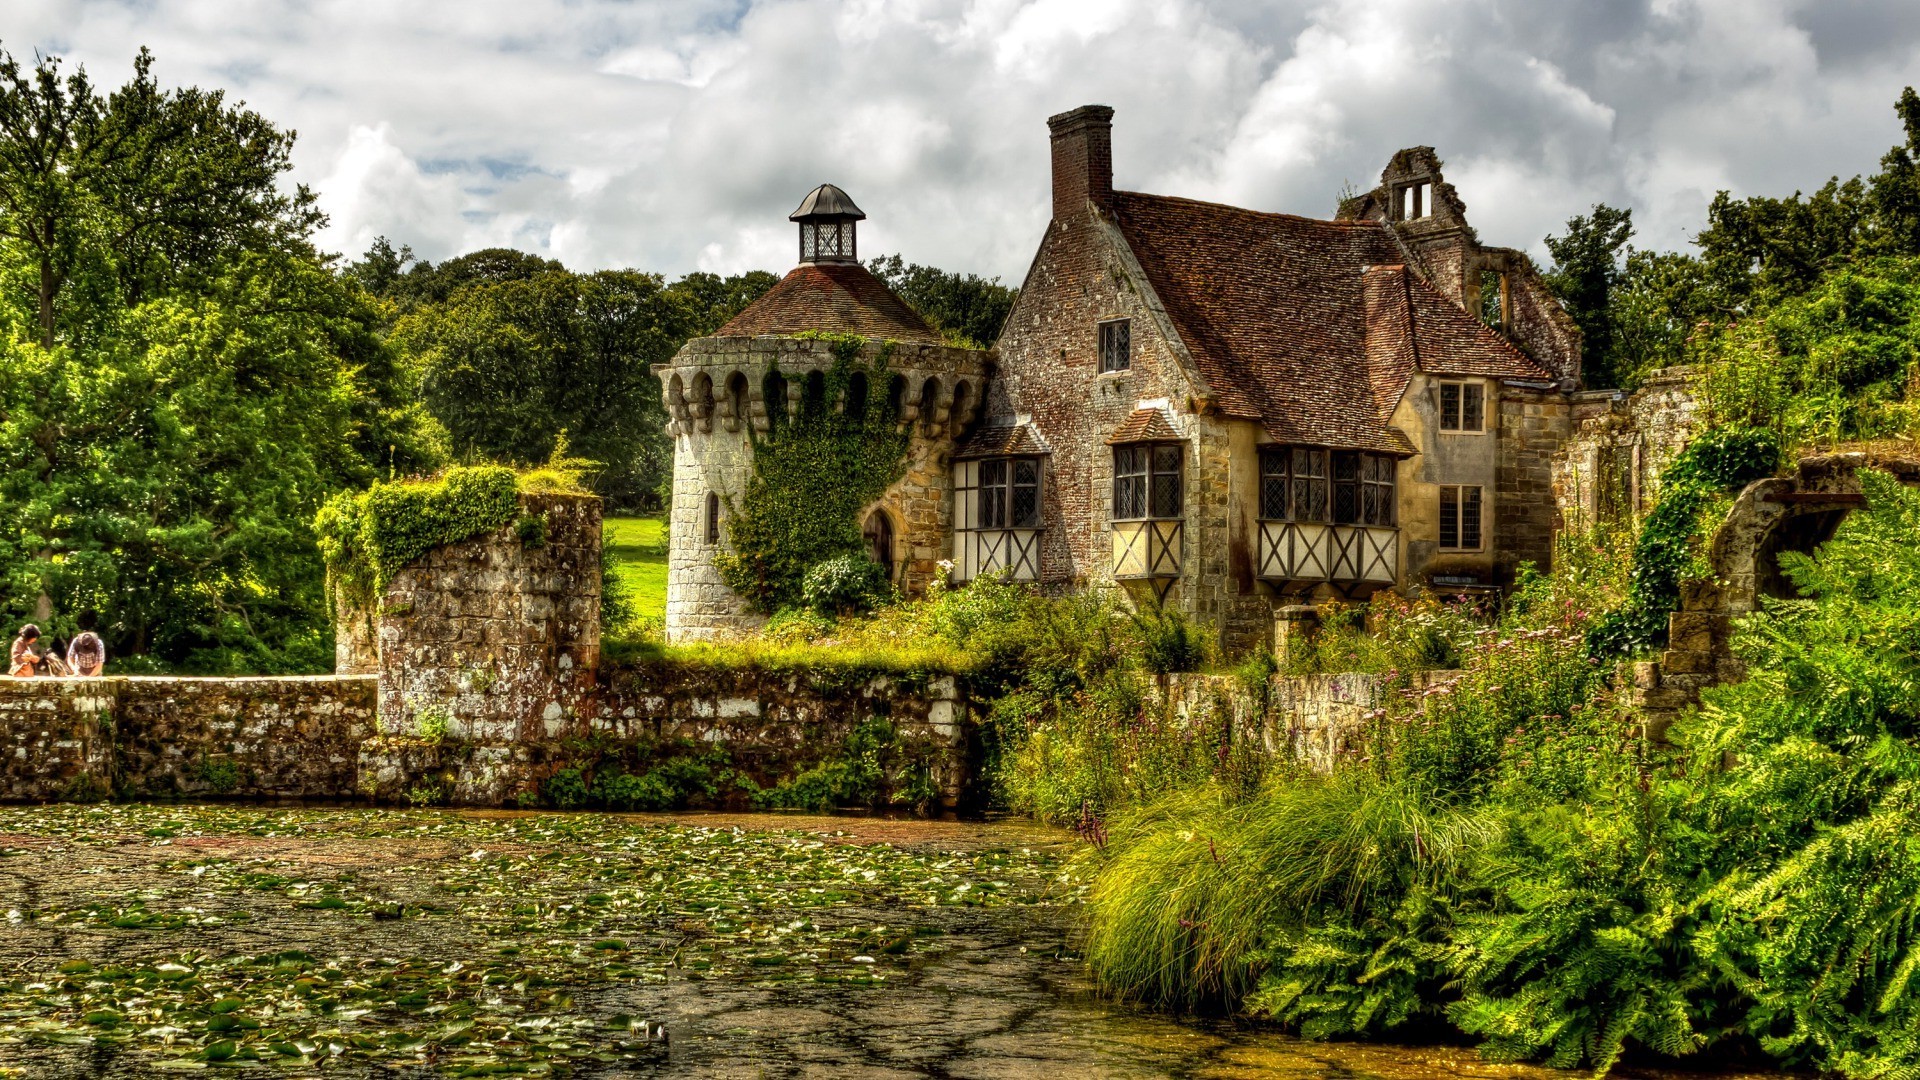 architecture, Old Building, Trees, Nature, Bricks, Plants, England, UK, Scotney Castle, HDR, Clouds, Forest, Lake, Couple Wallpaper